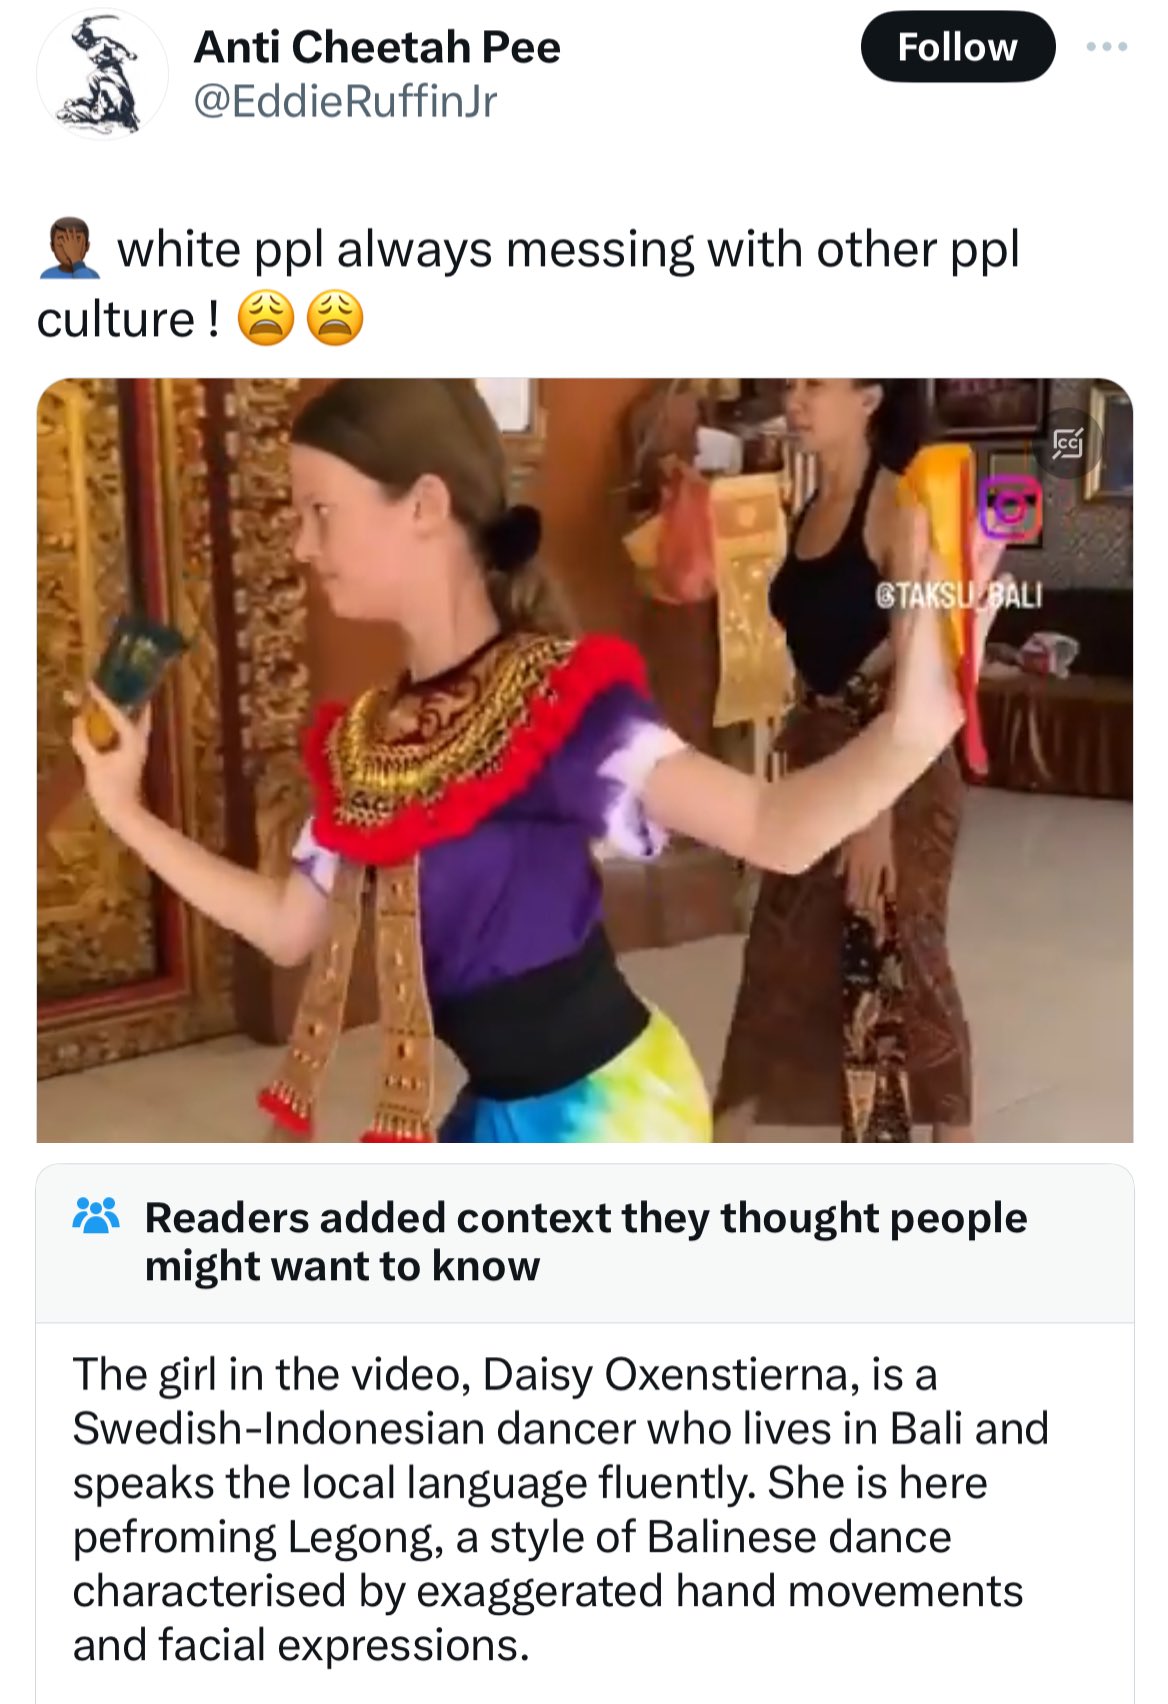 belly dance - Anti Cheetah Pee RuffinJr white ppl always messing with other ppl culture! Gtaksu Bali Readers added context they thought people might want to know The girl in the video, Daisy Oxenstierna, is a SwedishIndonesian dancer who lives in Bali and